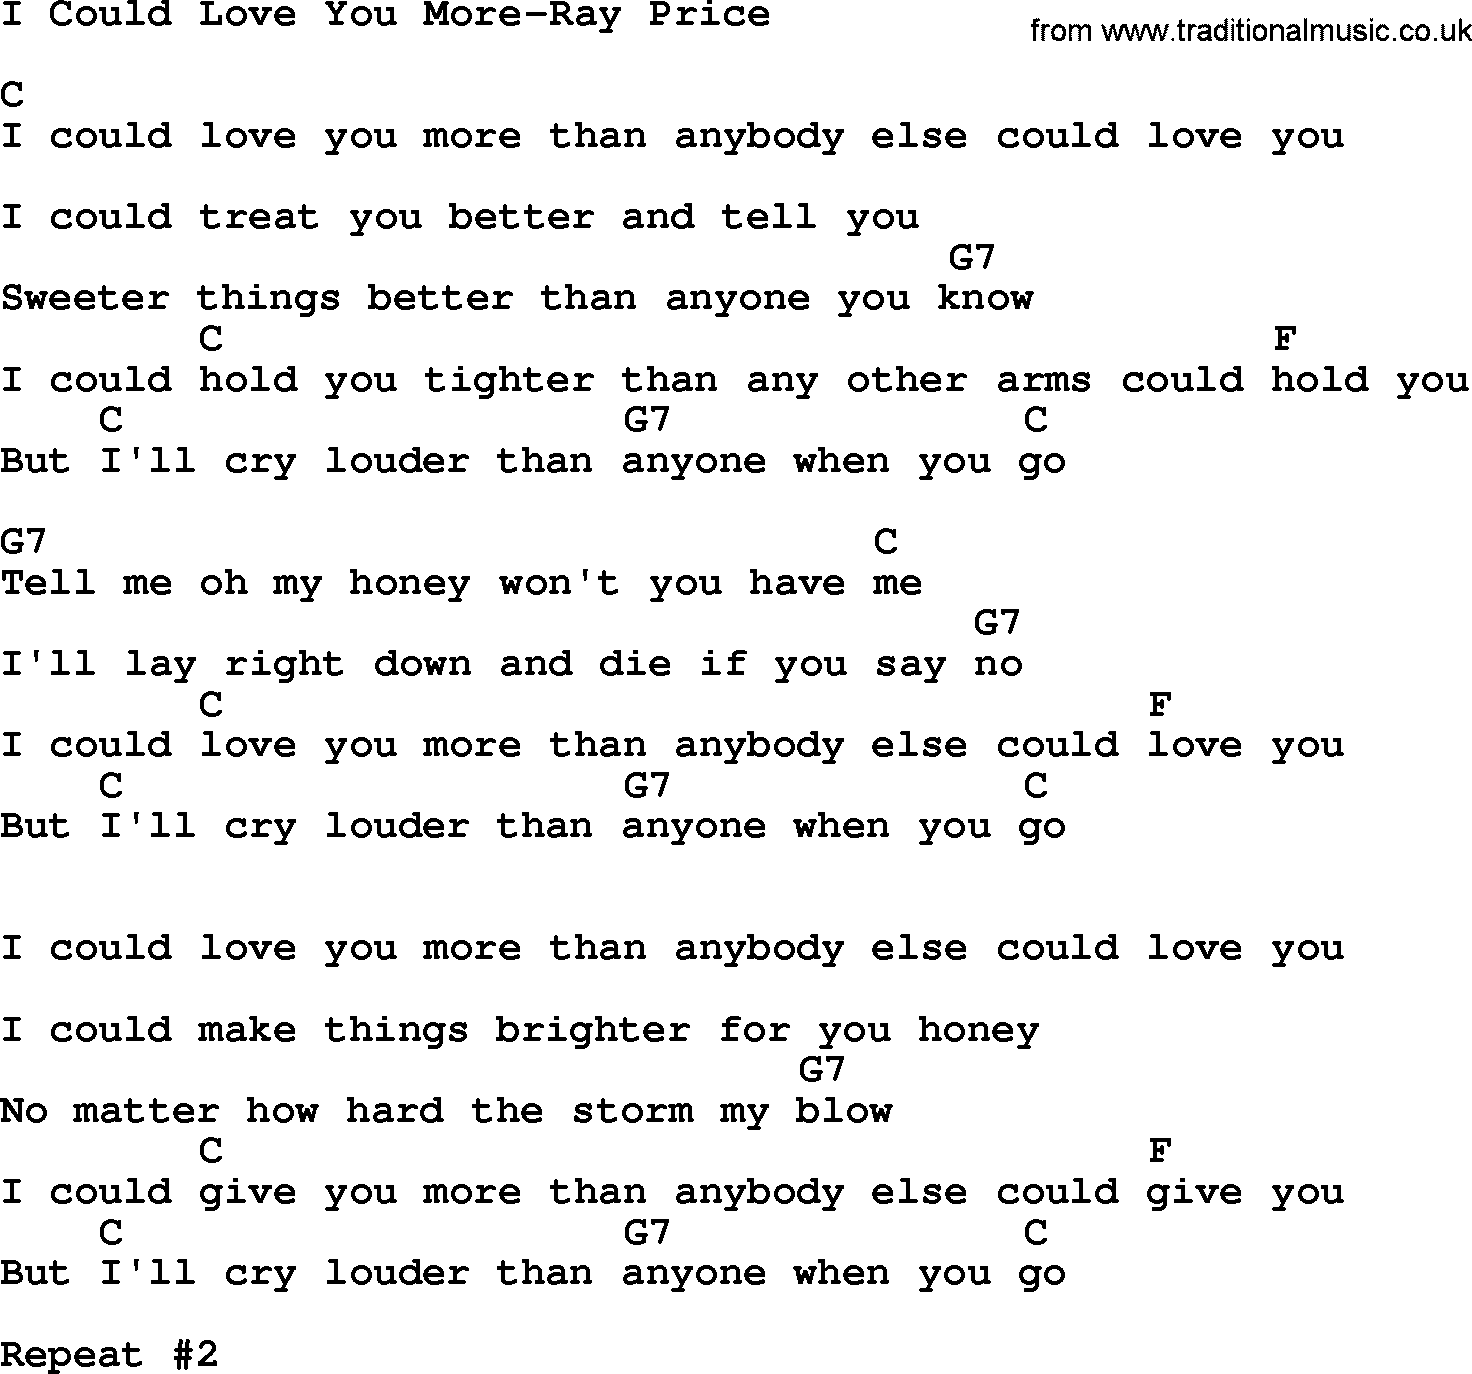 Country music song: I Could Love You More-Ray Price lyrics and chords